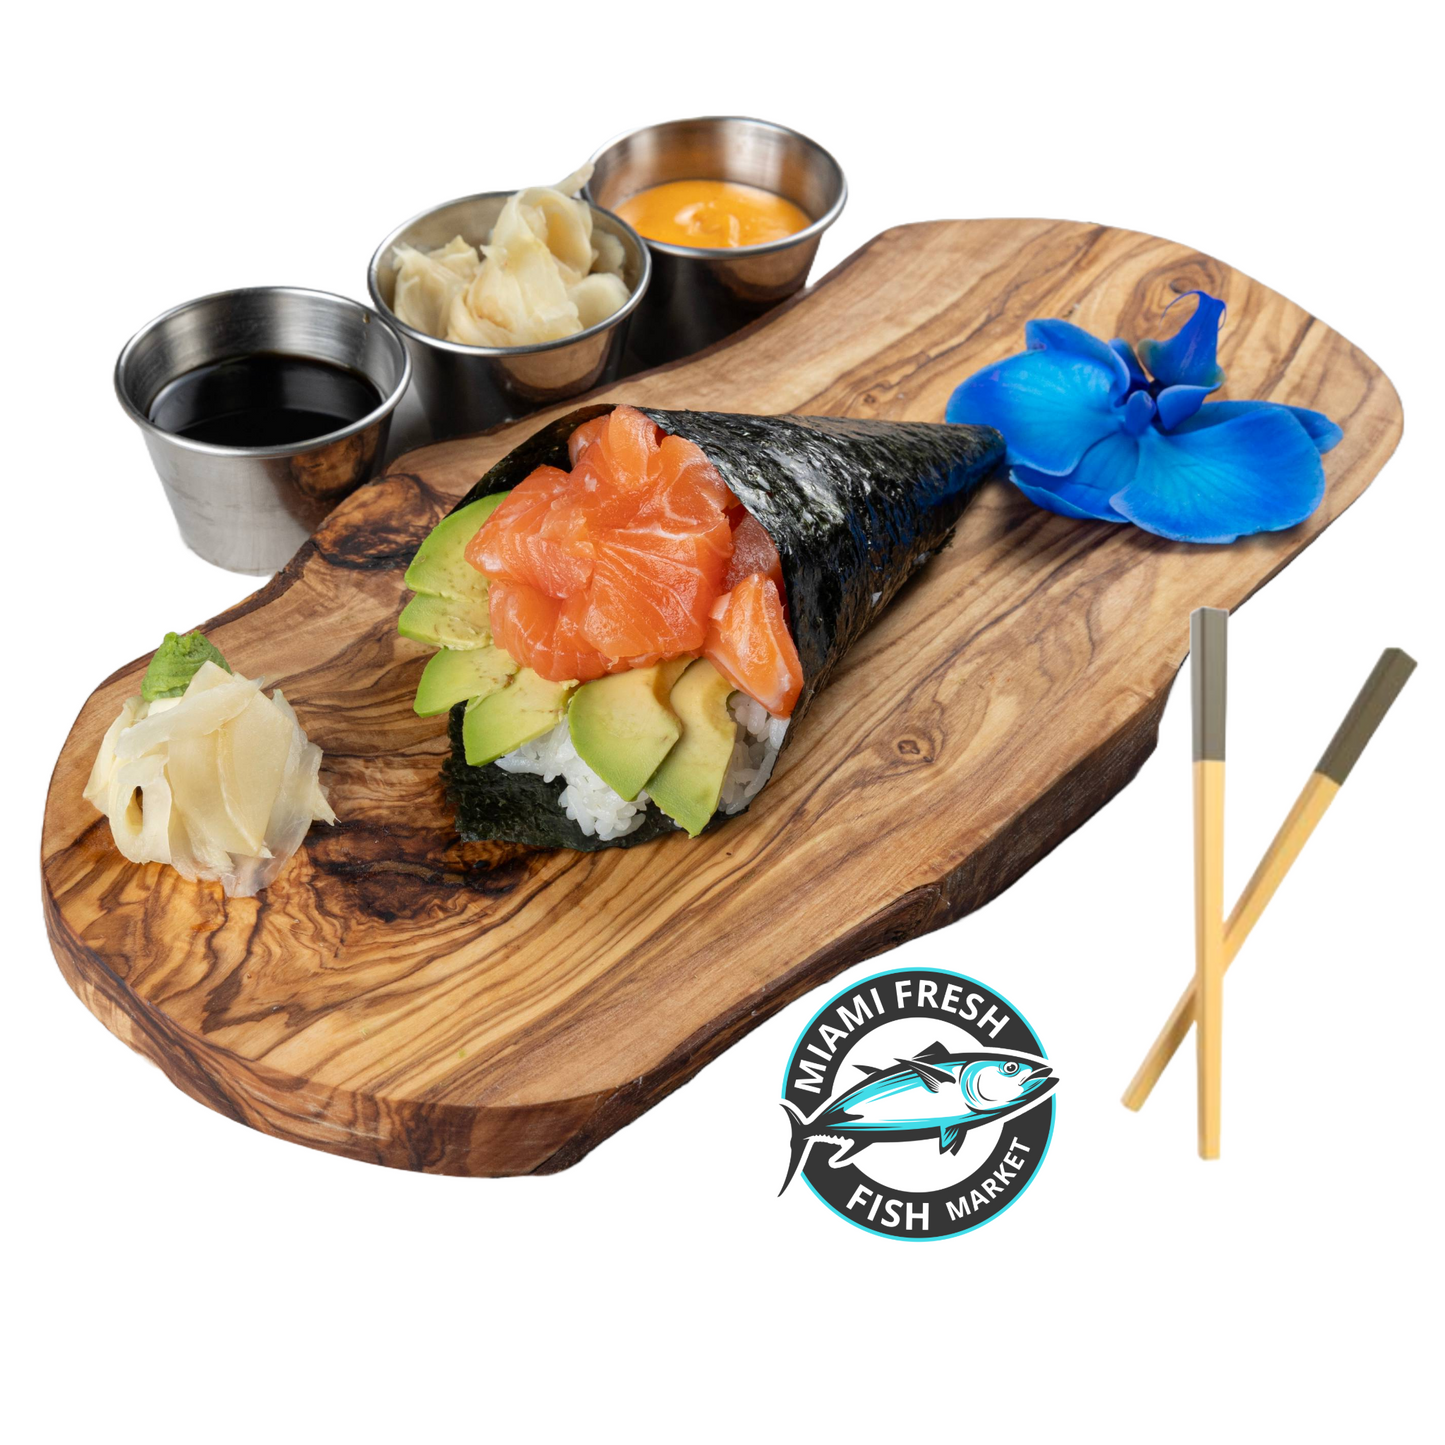 Salmon-Sushi-Hand-Roll-Chopsticks-on-brown-plate-side-sauces-8-pc-Miami-Beach-Sushi-Roll